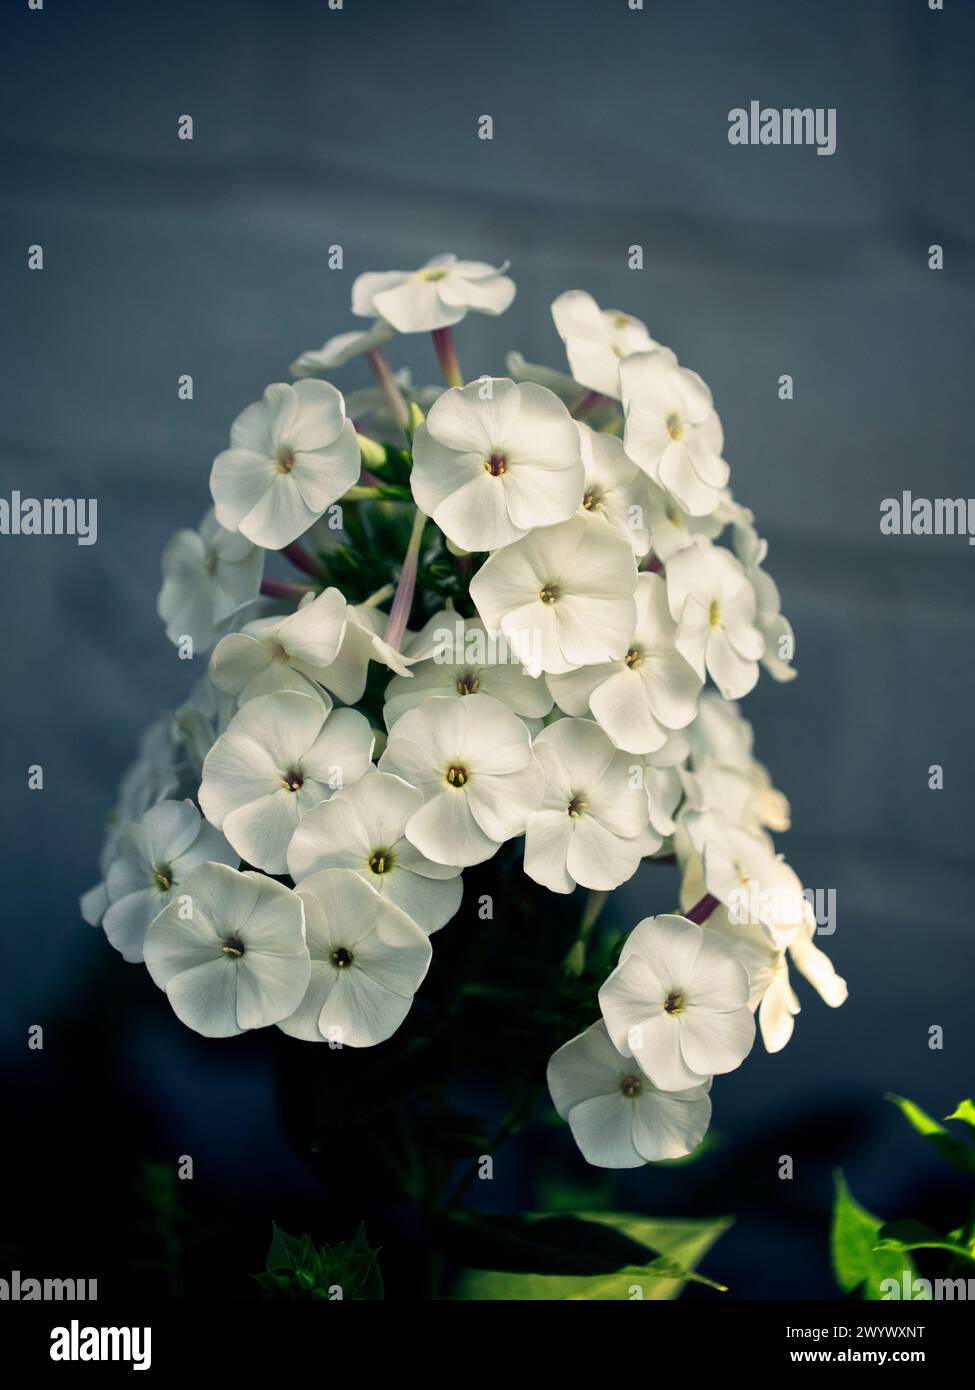 White blossoms bloom amidst a backdrop of green leaves, showcasing nature’s contrast and harmony. Stock Photo